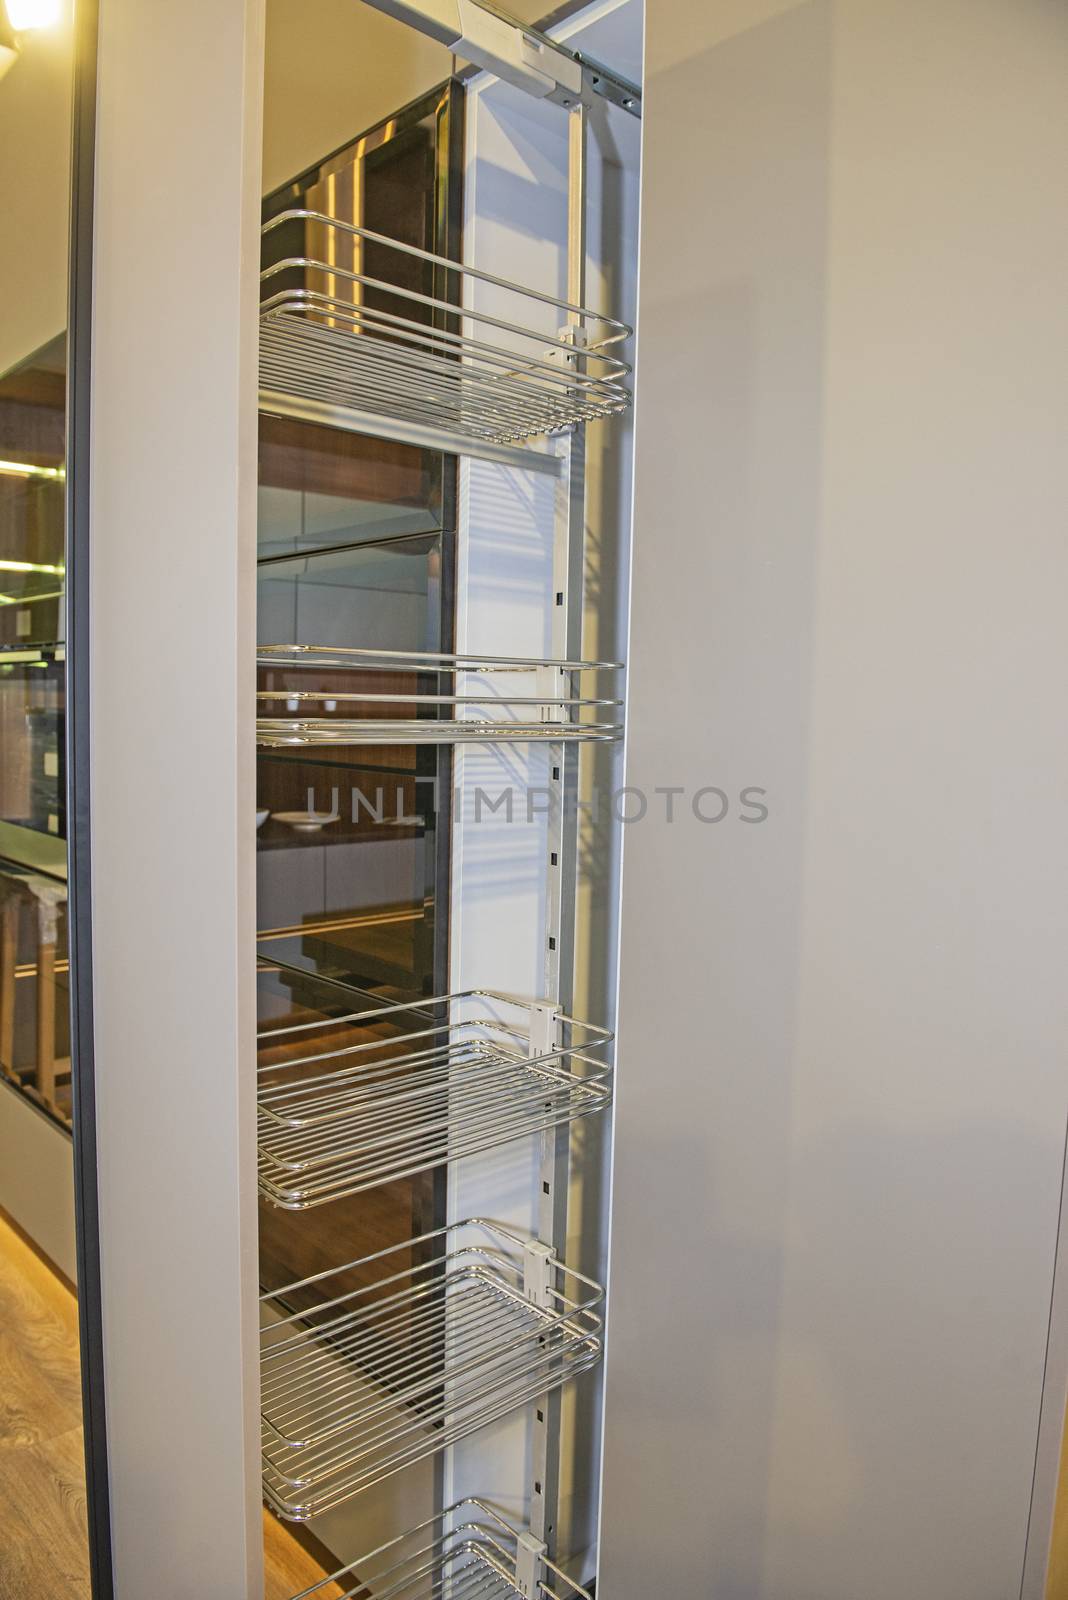 Interior design decor of kitchen in luxury apartment showing closeup detail of sliding pantry cupboard with shelves